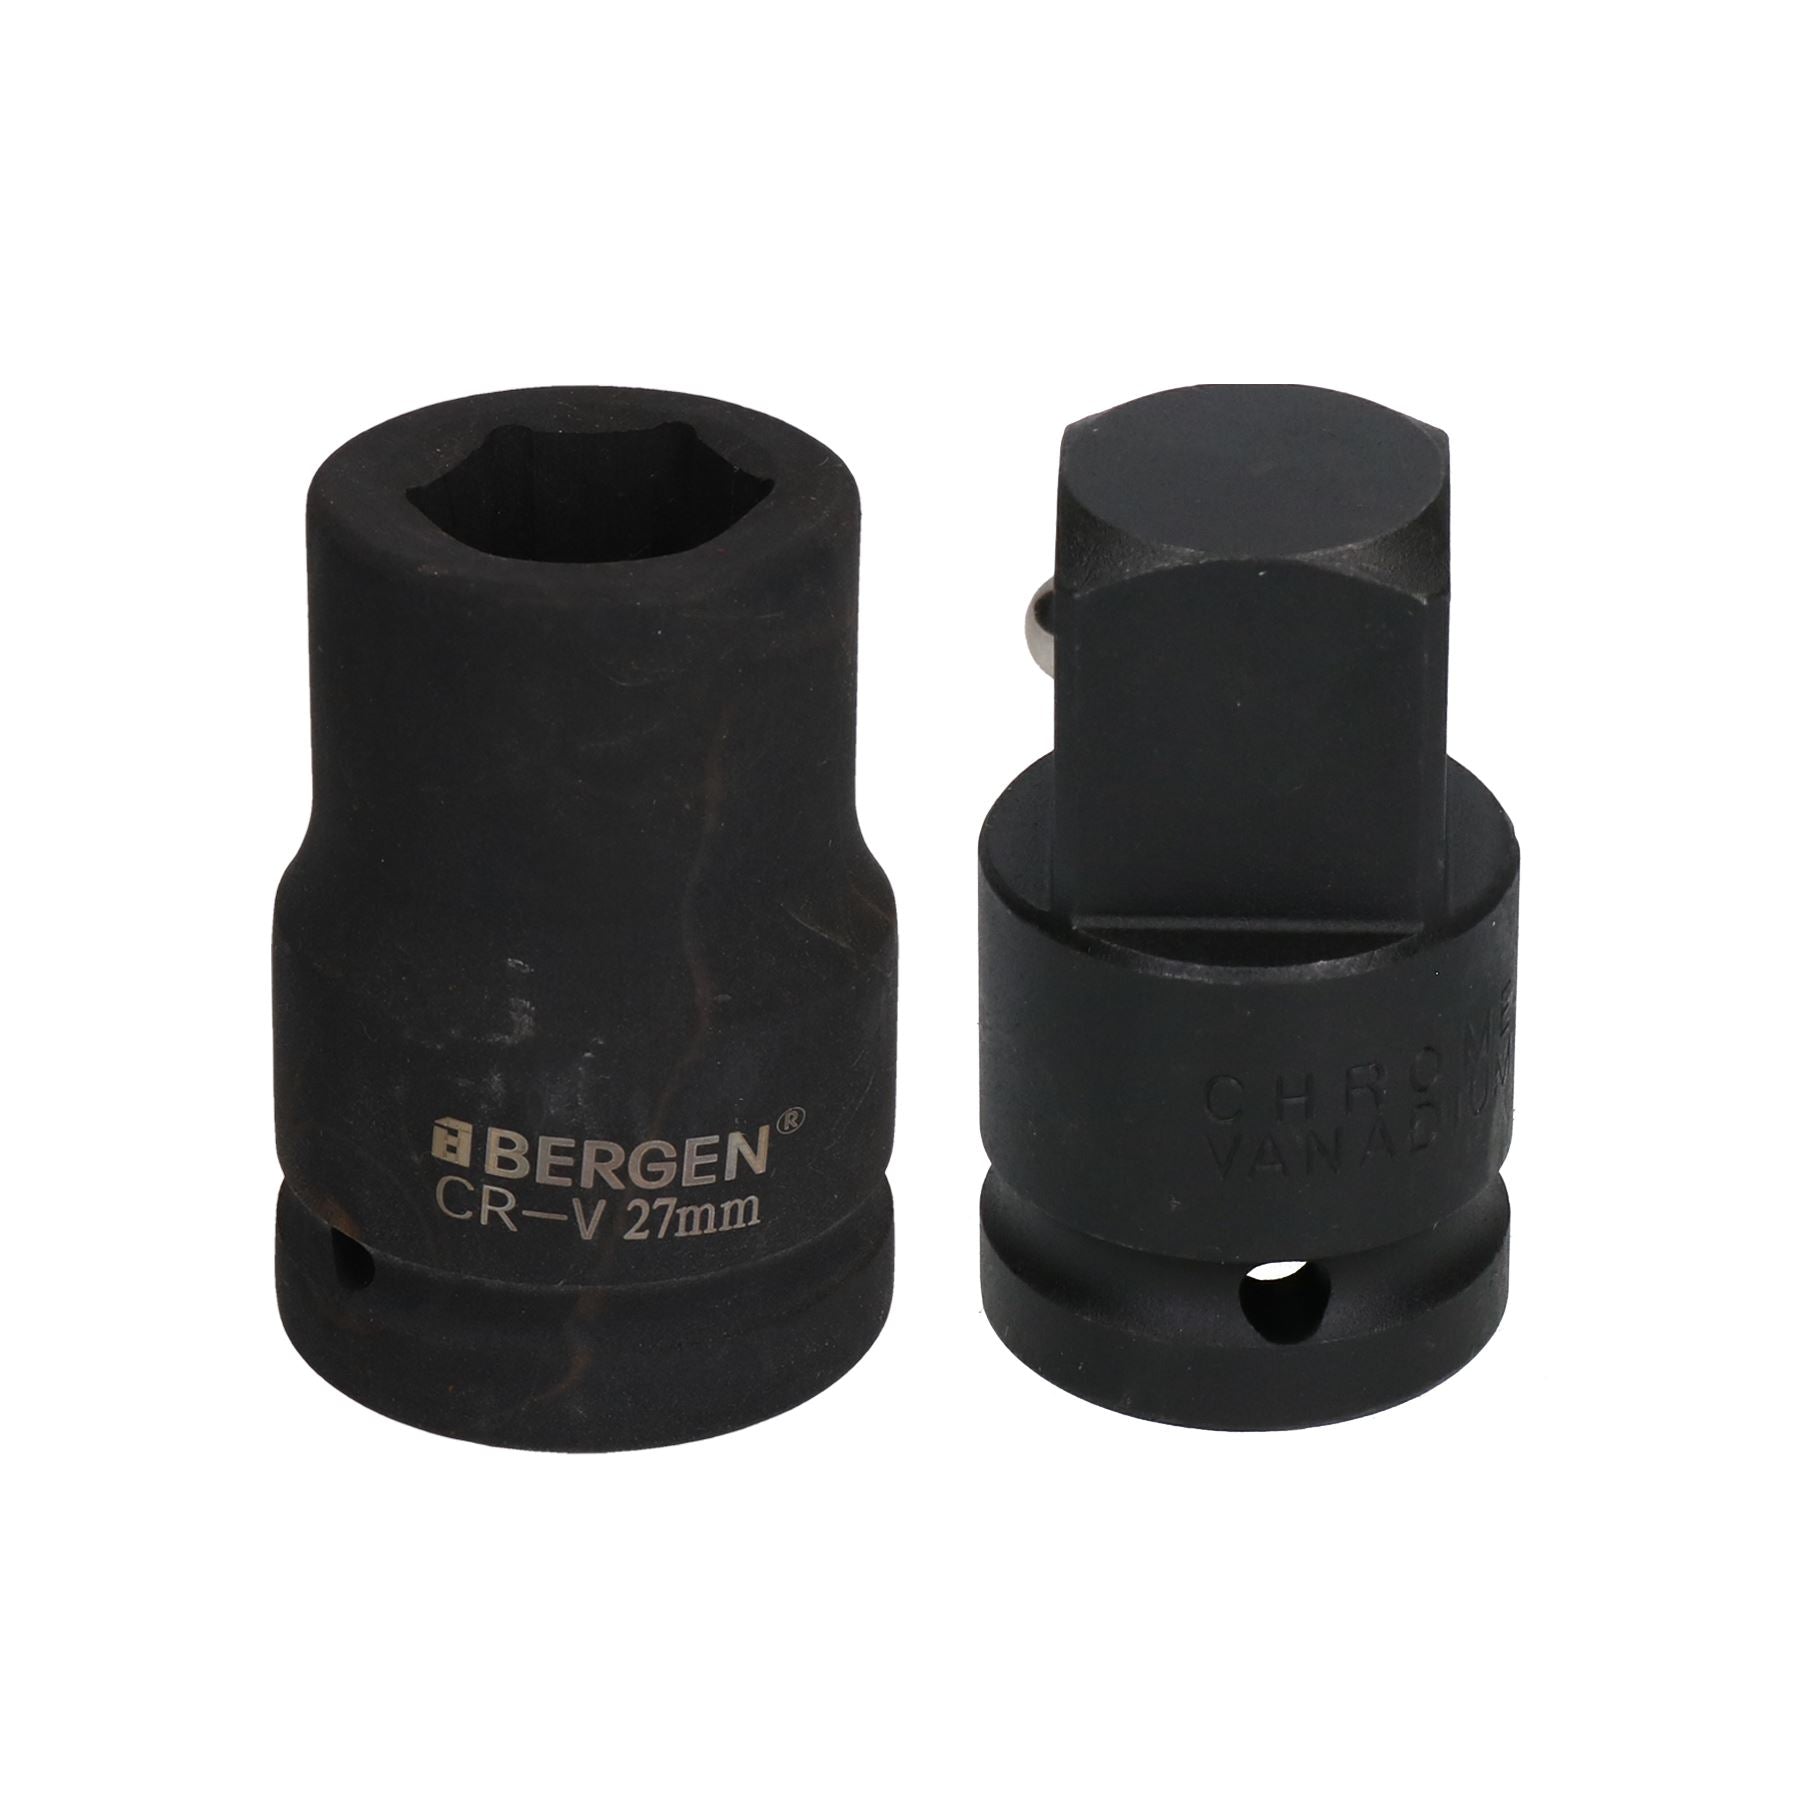 27mm Metric 3/4" or 1" Drive Deep Impact Socket 6 Sided With Step Up Adapter